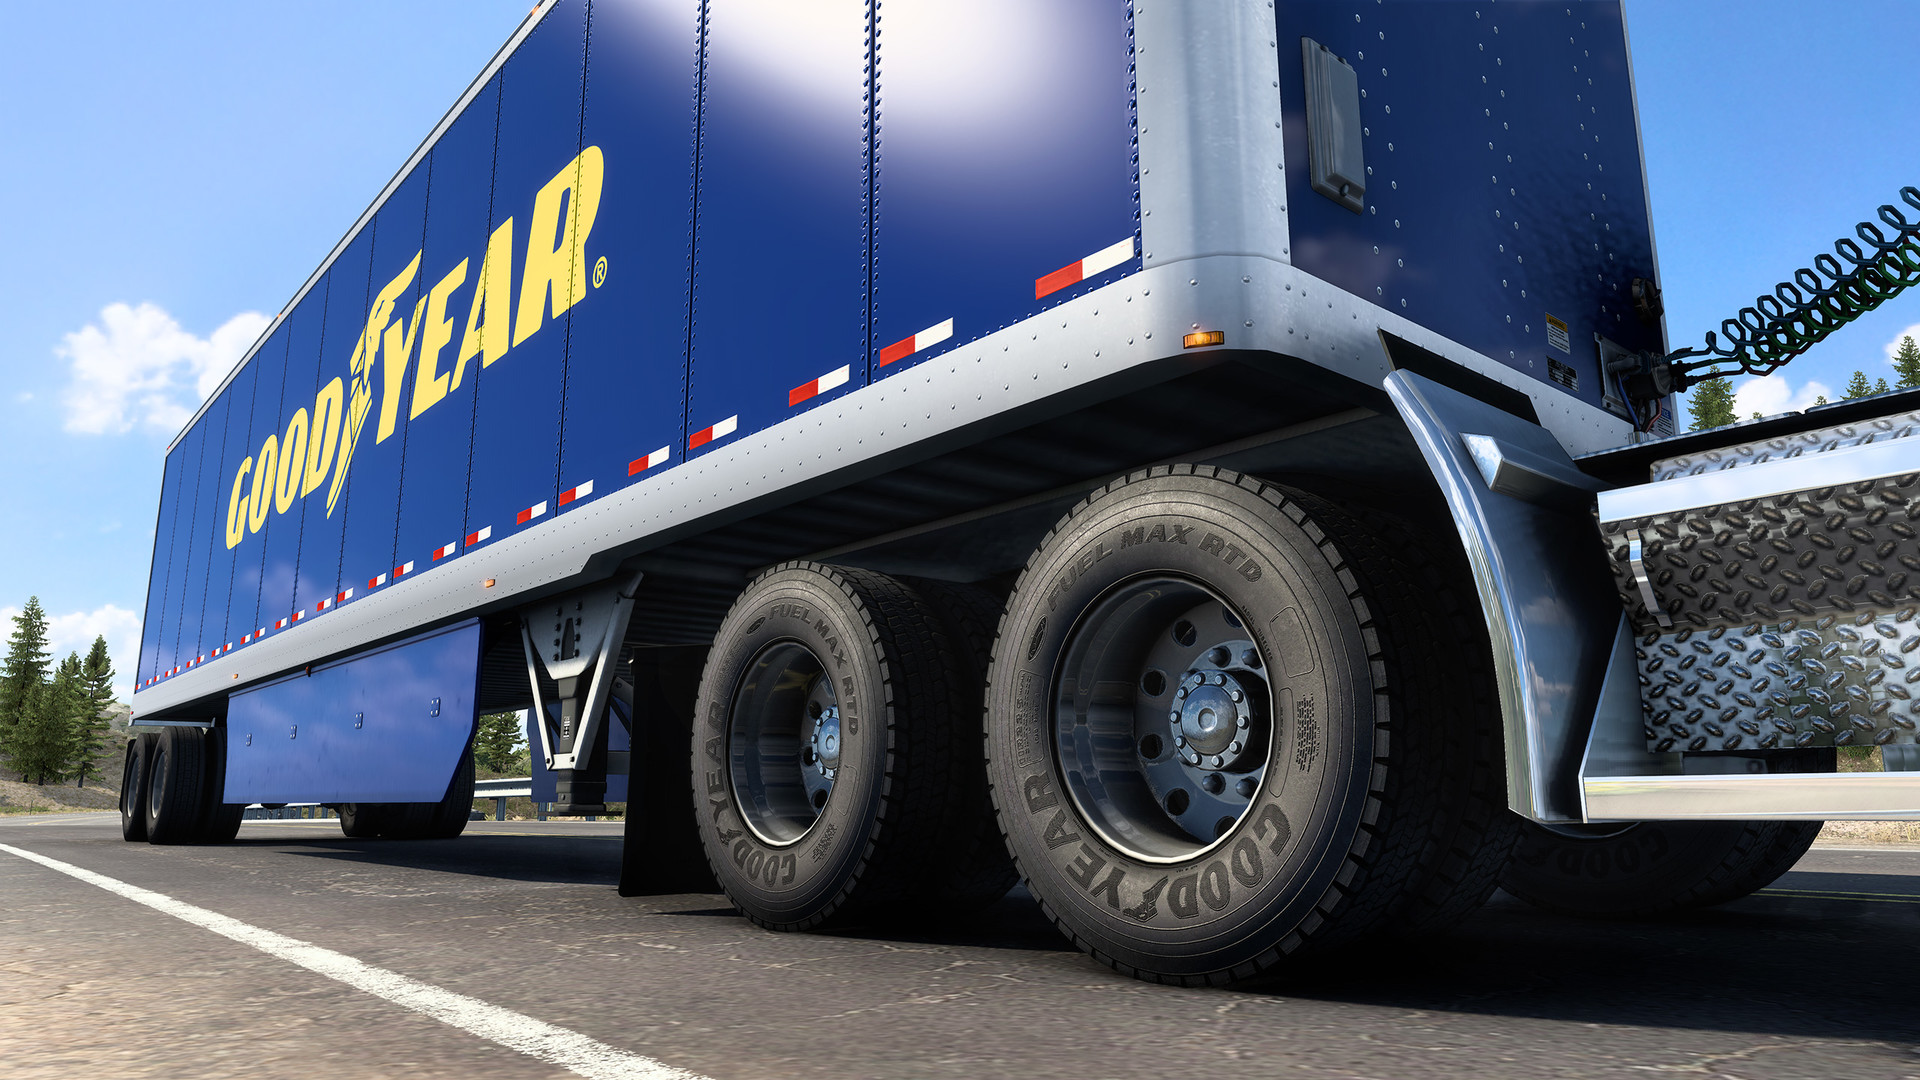 American Truck Simulator - Goodyear Tires Pack on Steam